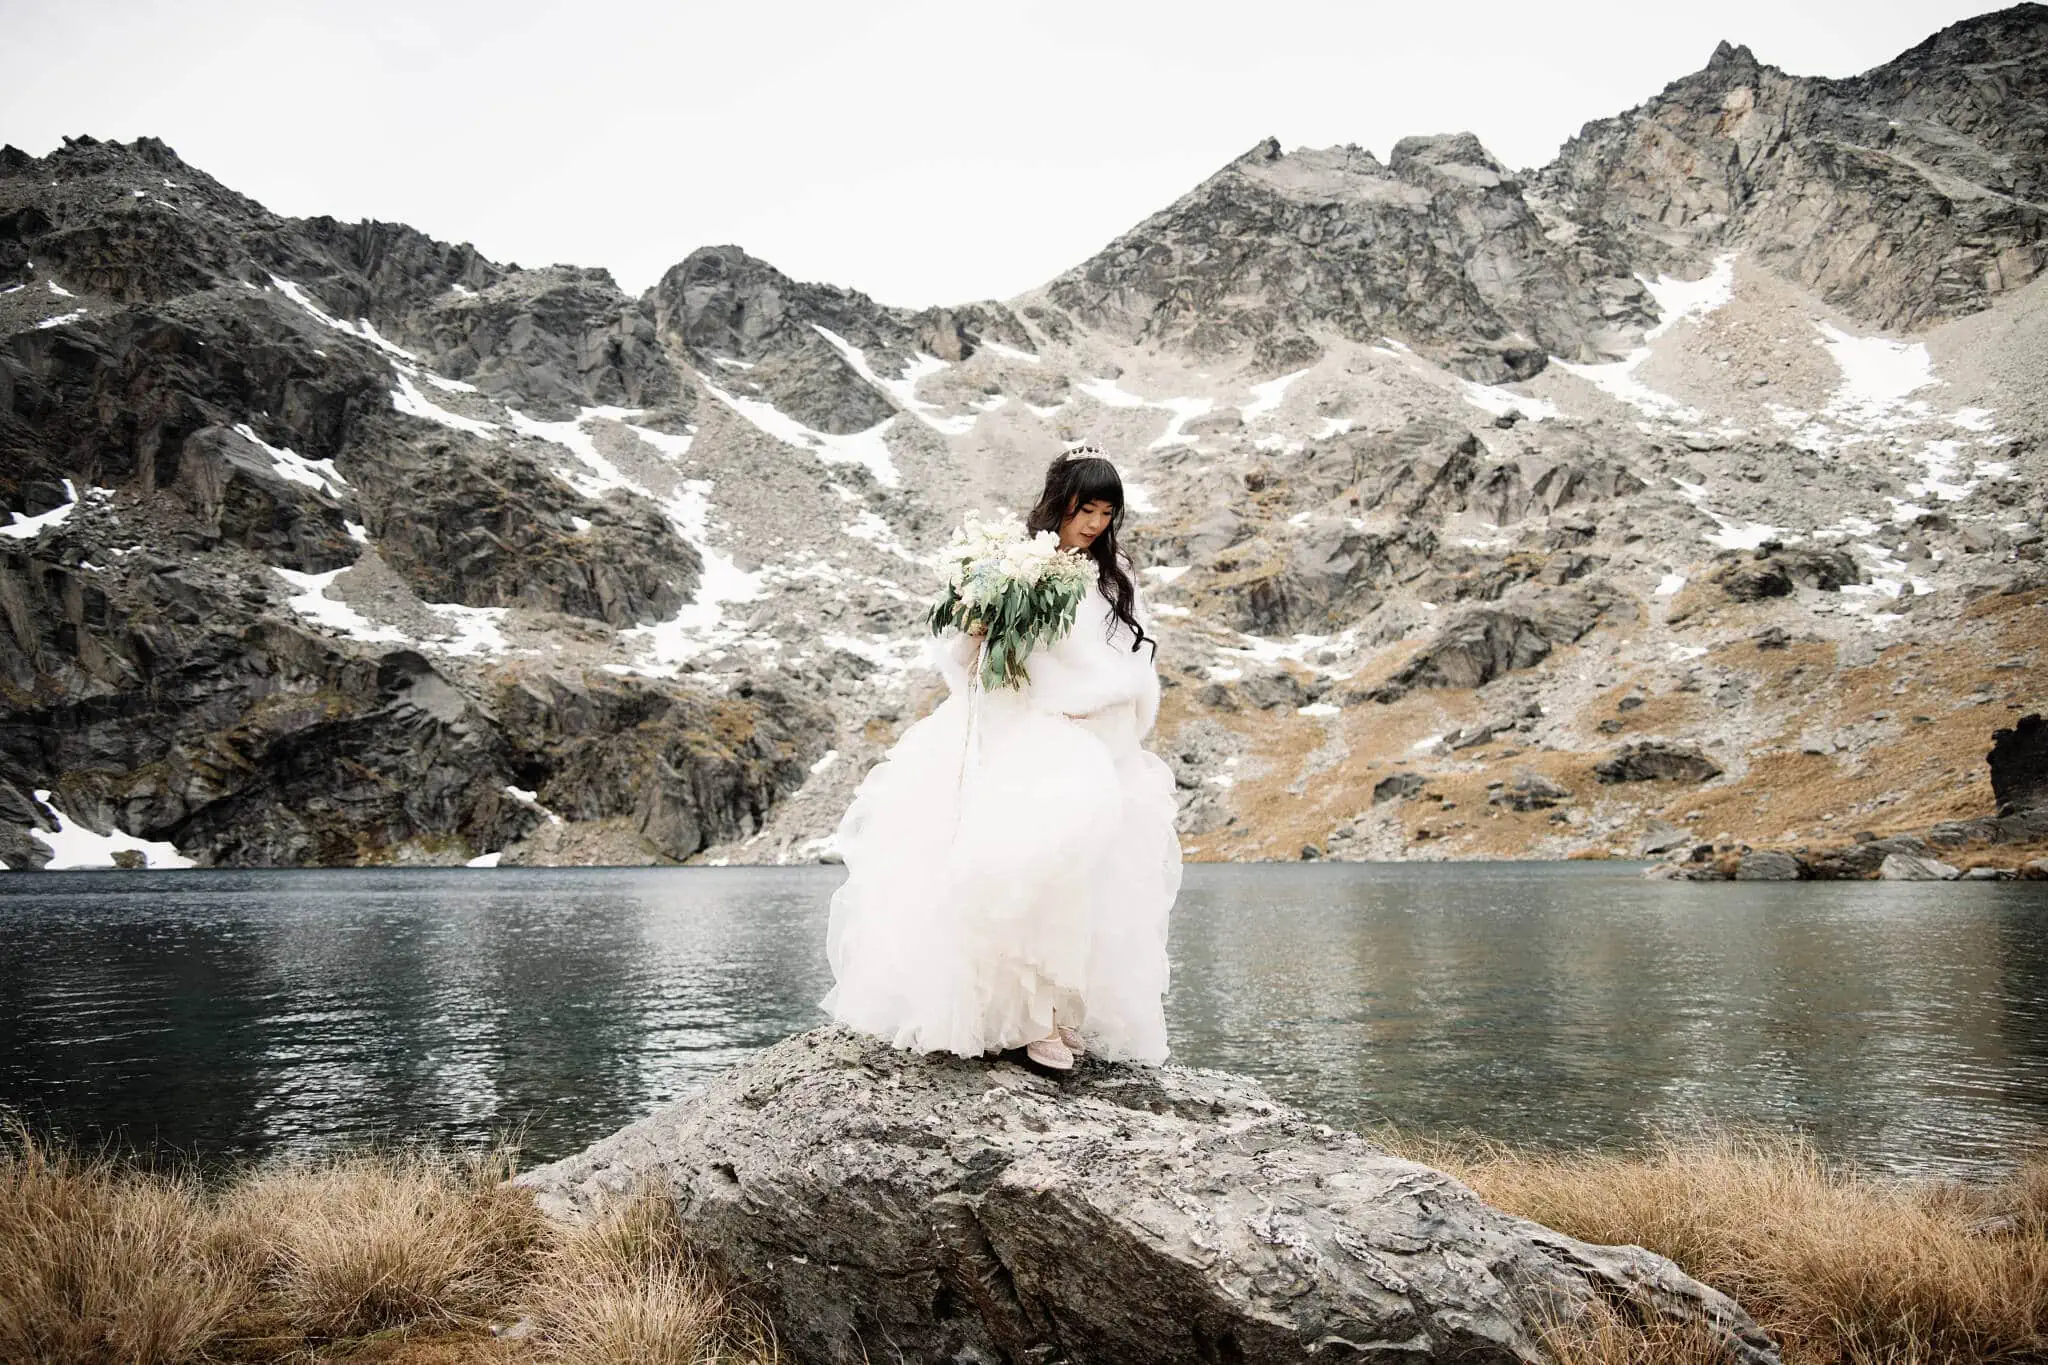 Carlos and Wanzhu's intimate heli elopement wedding at Cecil Peak with a bride standing on a rock next to a lake in the mountains.